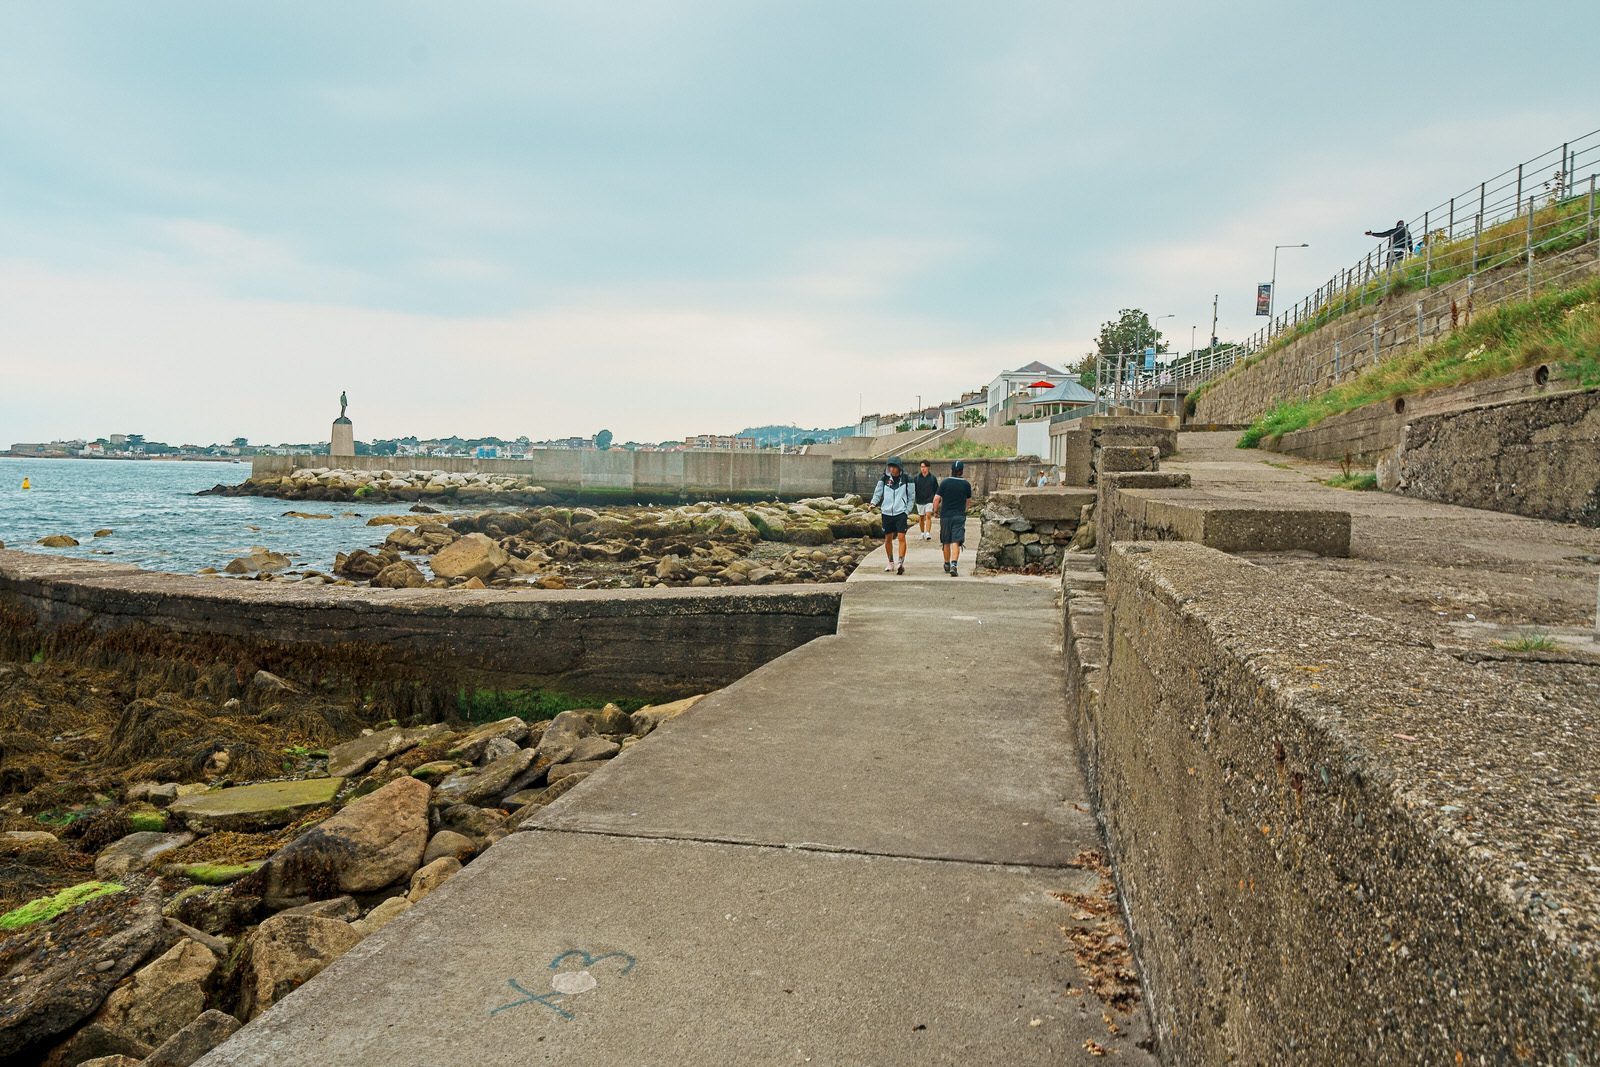 BETWEEN DUN LAOGHAIRE EAST PIER AND THE BATHS [THIS AREA HAS BEEN BADLY NEGLECTED] 004